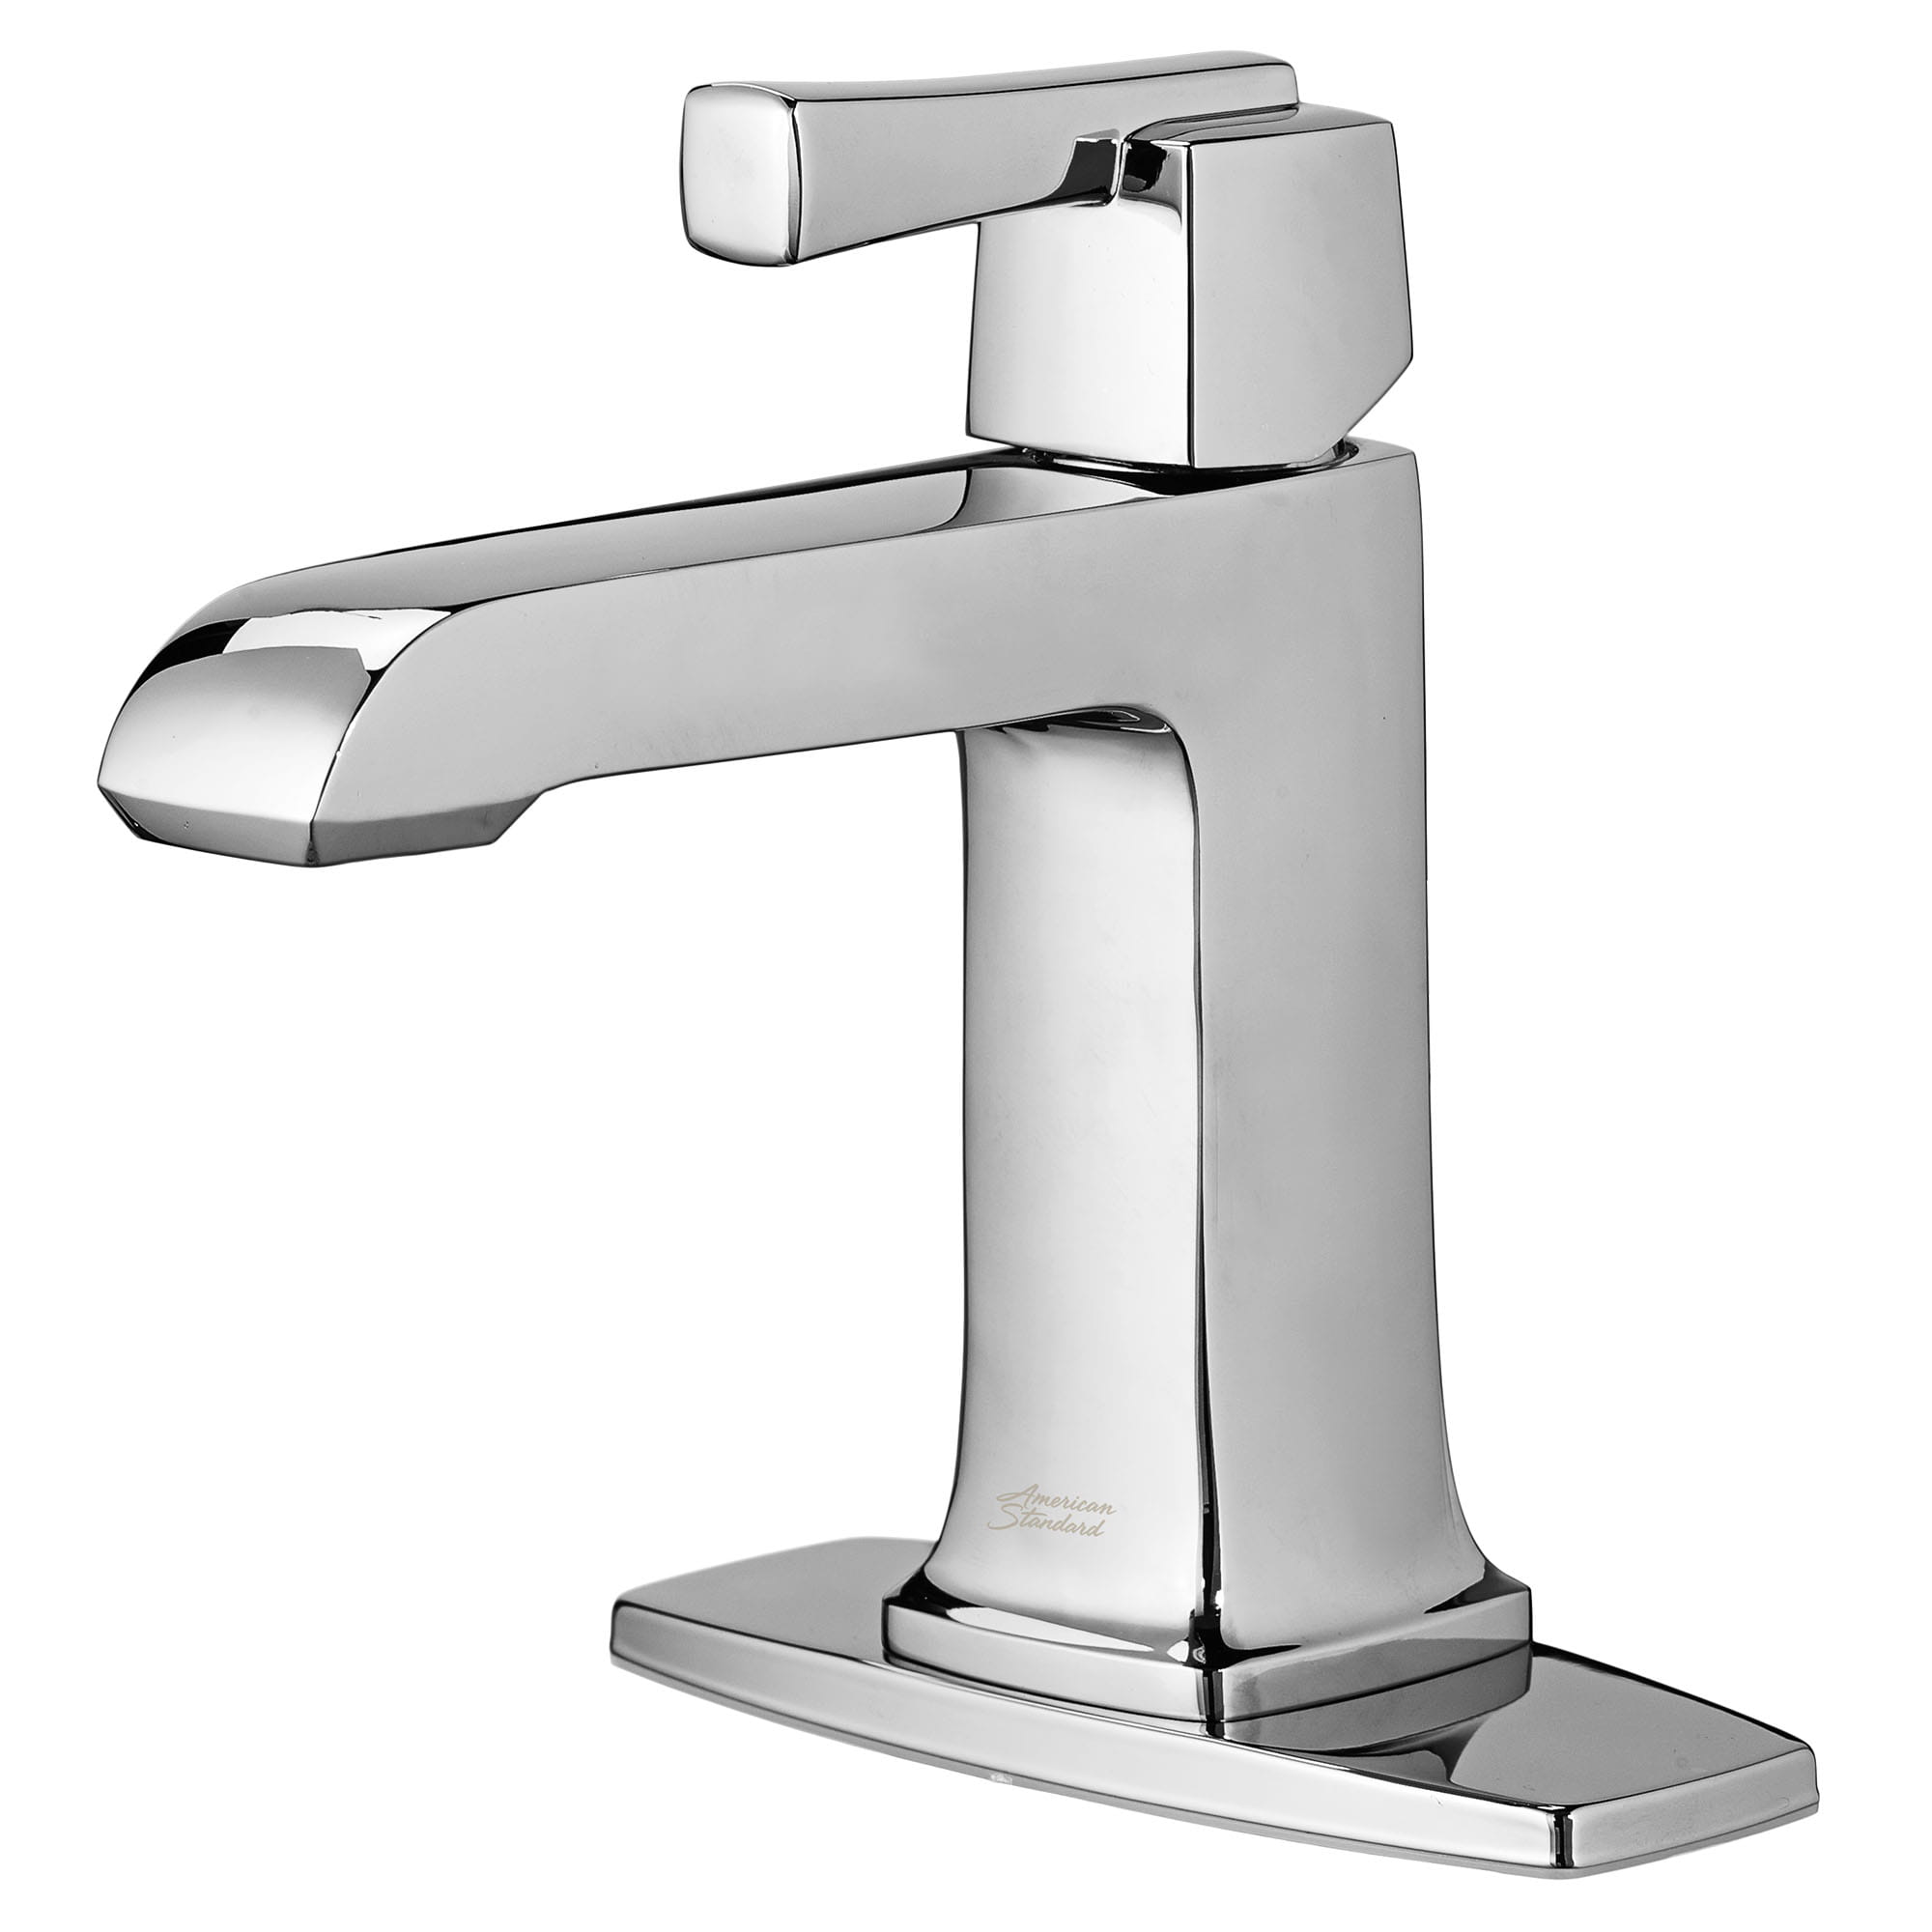 Townsend Single Hole Single Handle Bathroom Faucet 12 gpm 45 L min With Lever Handle CHROME